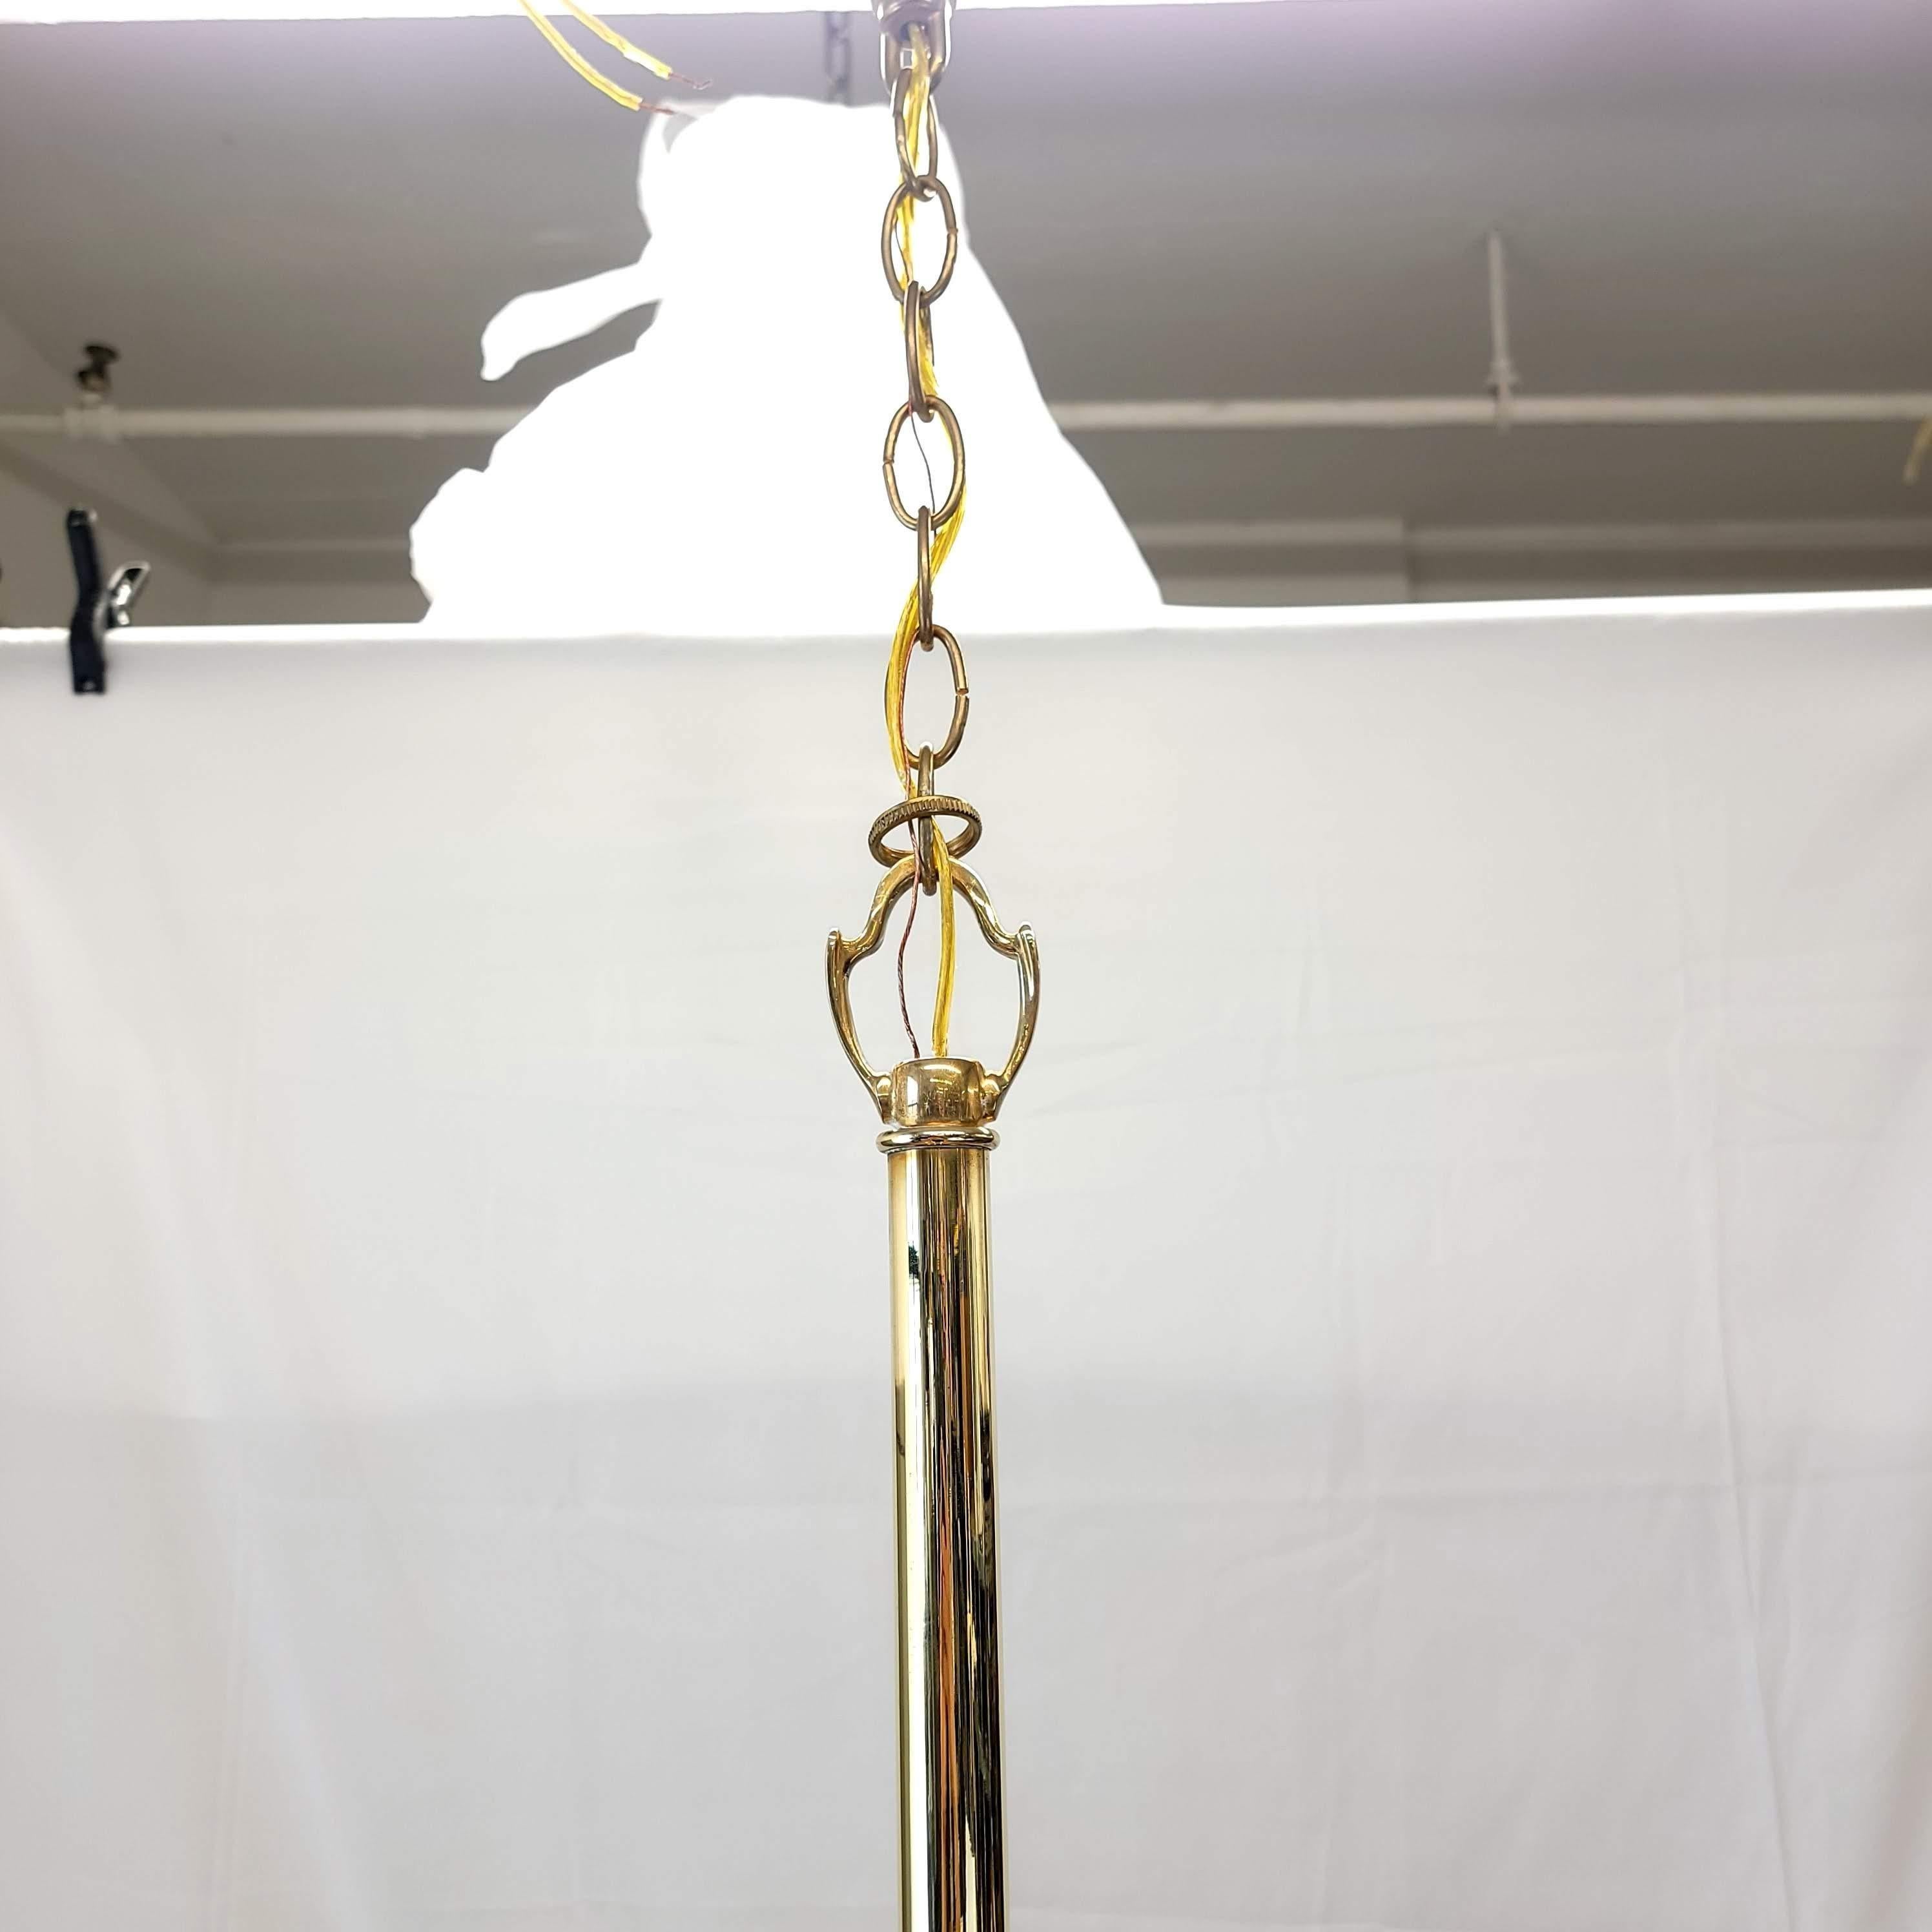 Hand-Crafted Majestic Mid-Century Modern Polished Brass Chandelier For Sale